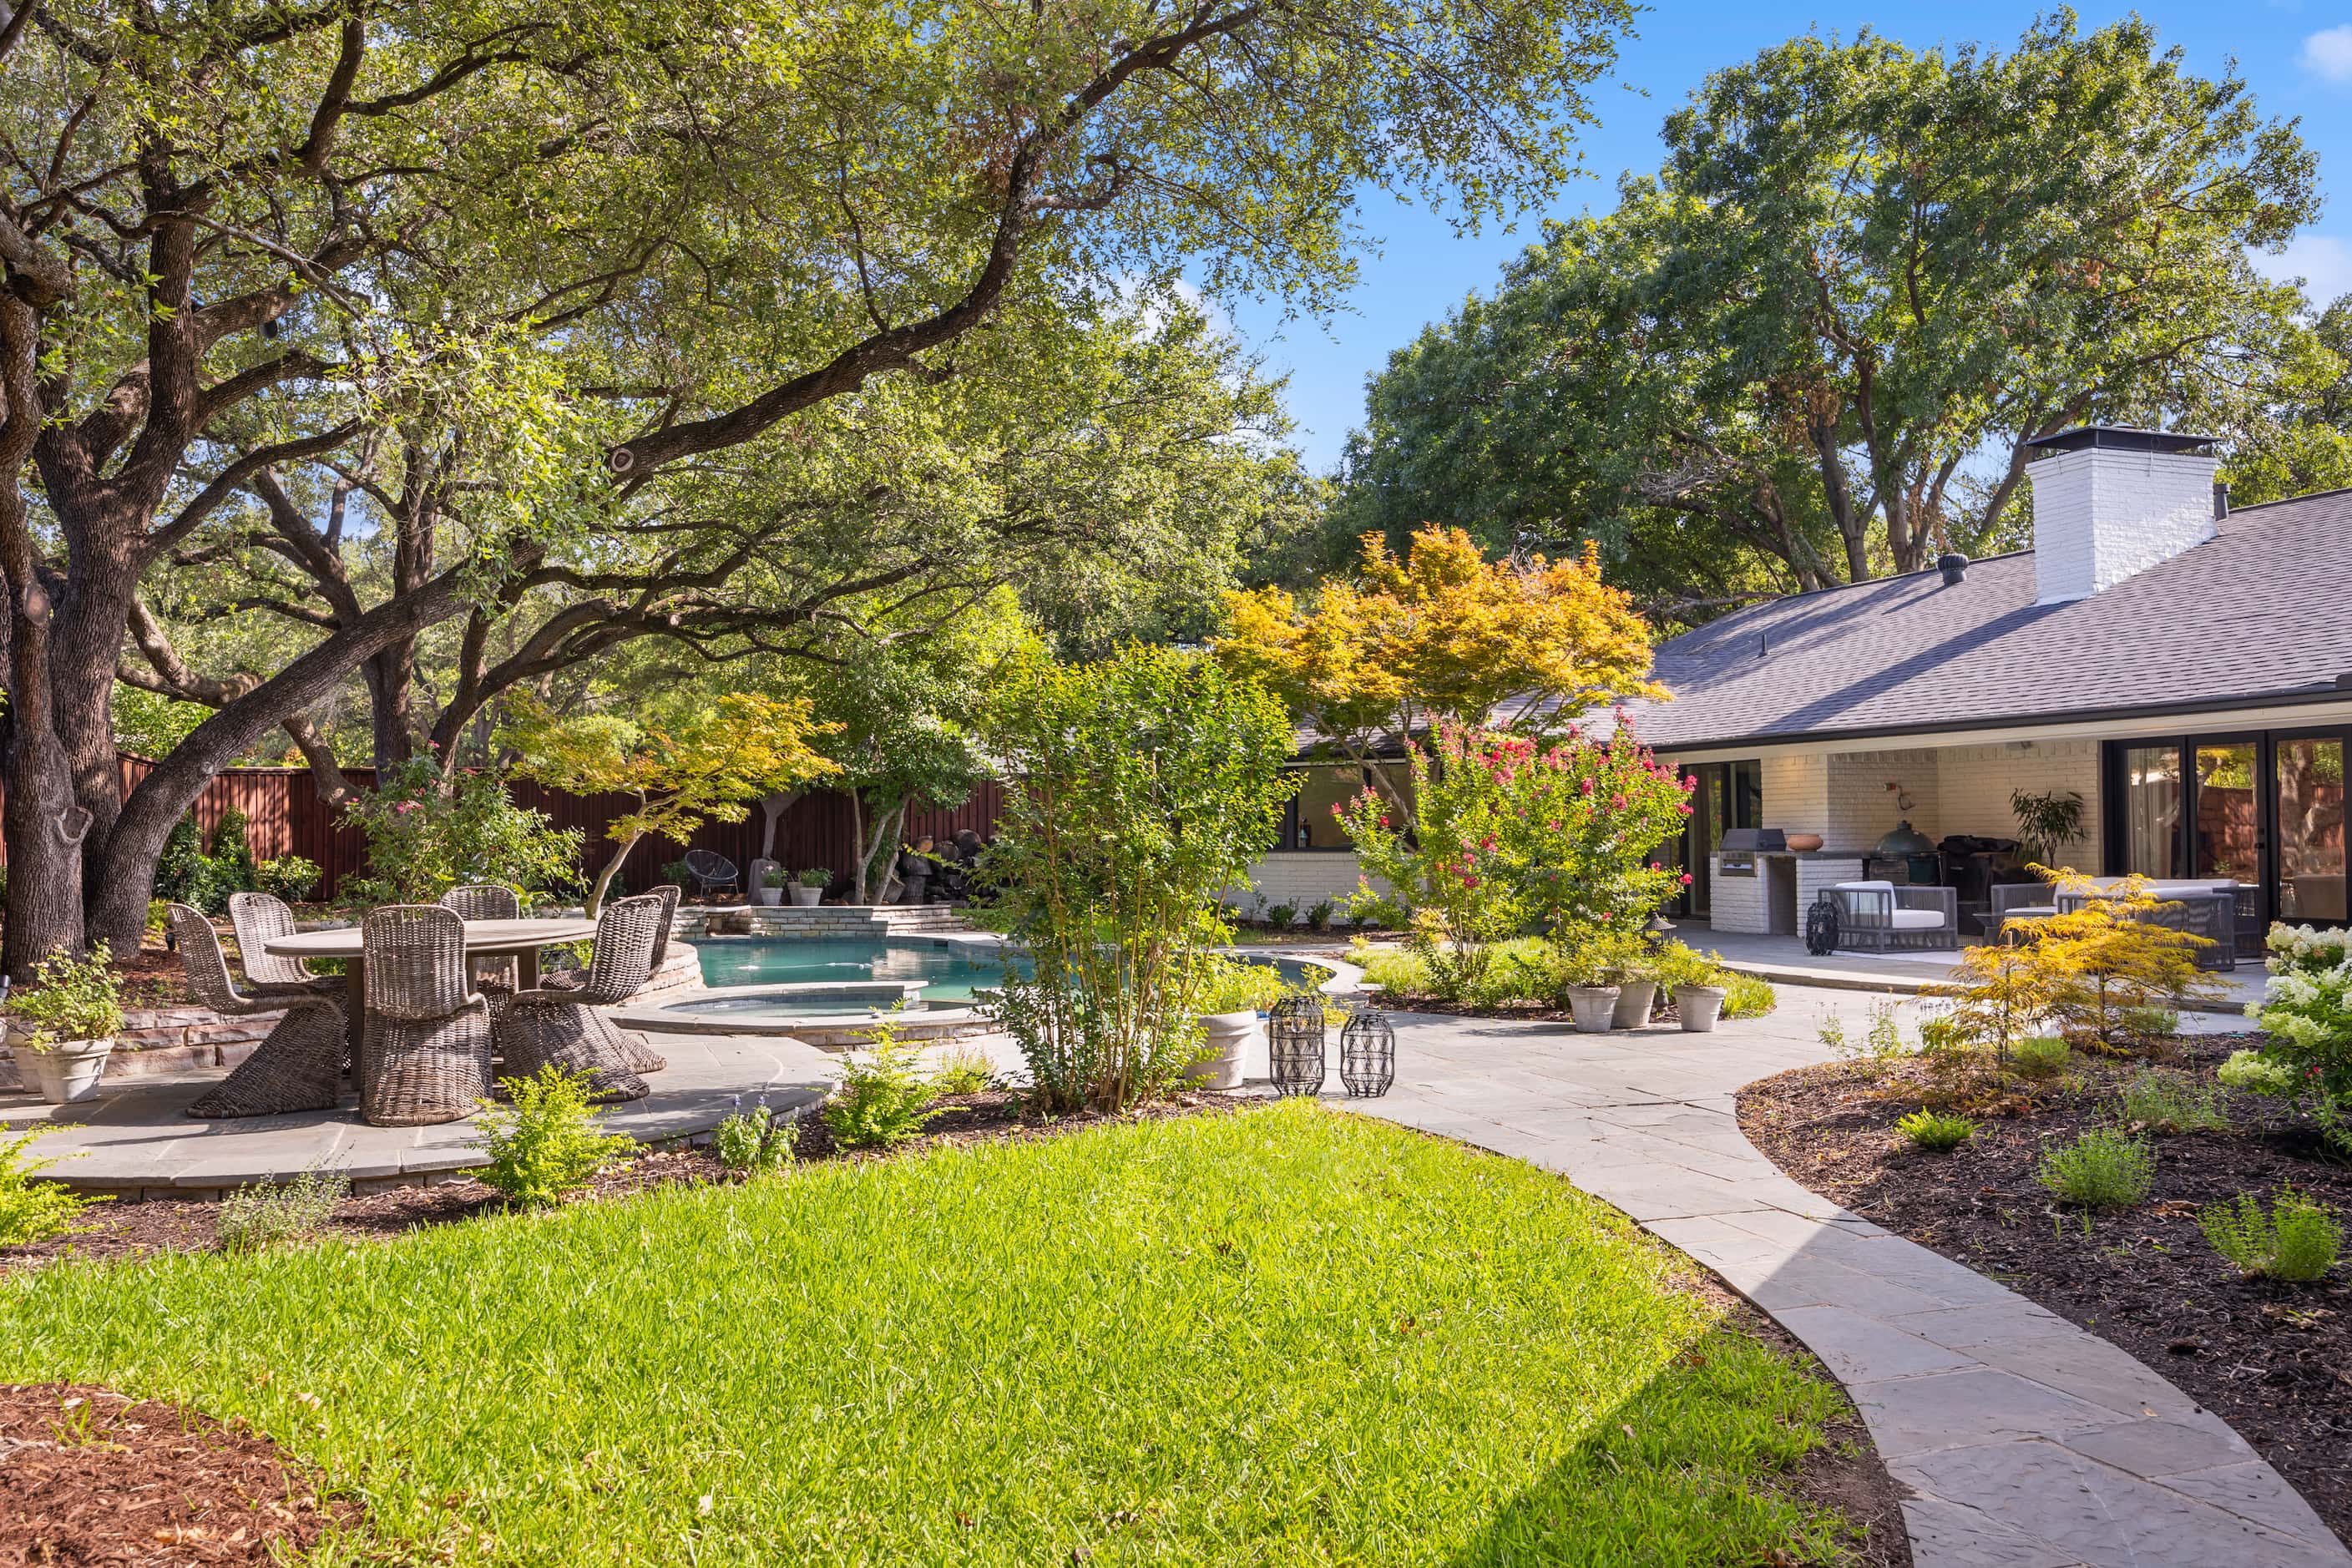 Backyard with pool and multiple outdoor seating areas at back of midcentury ranch-style home